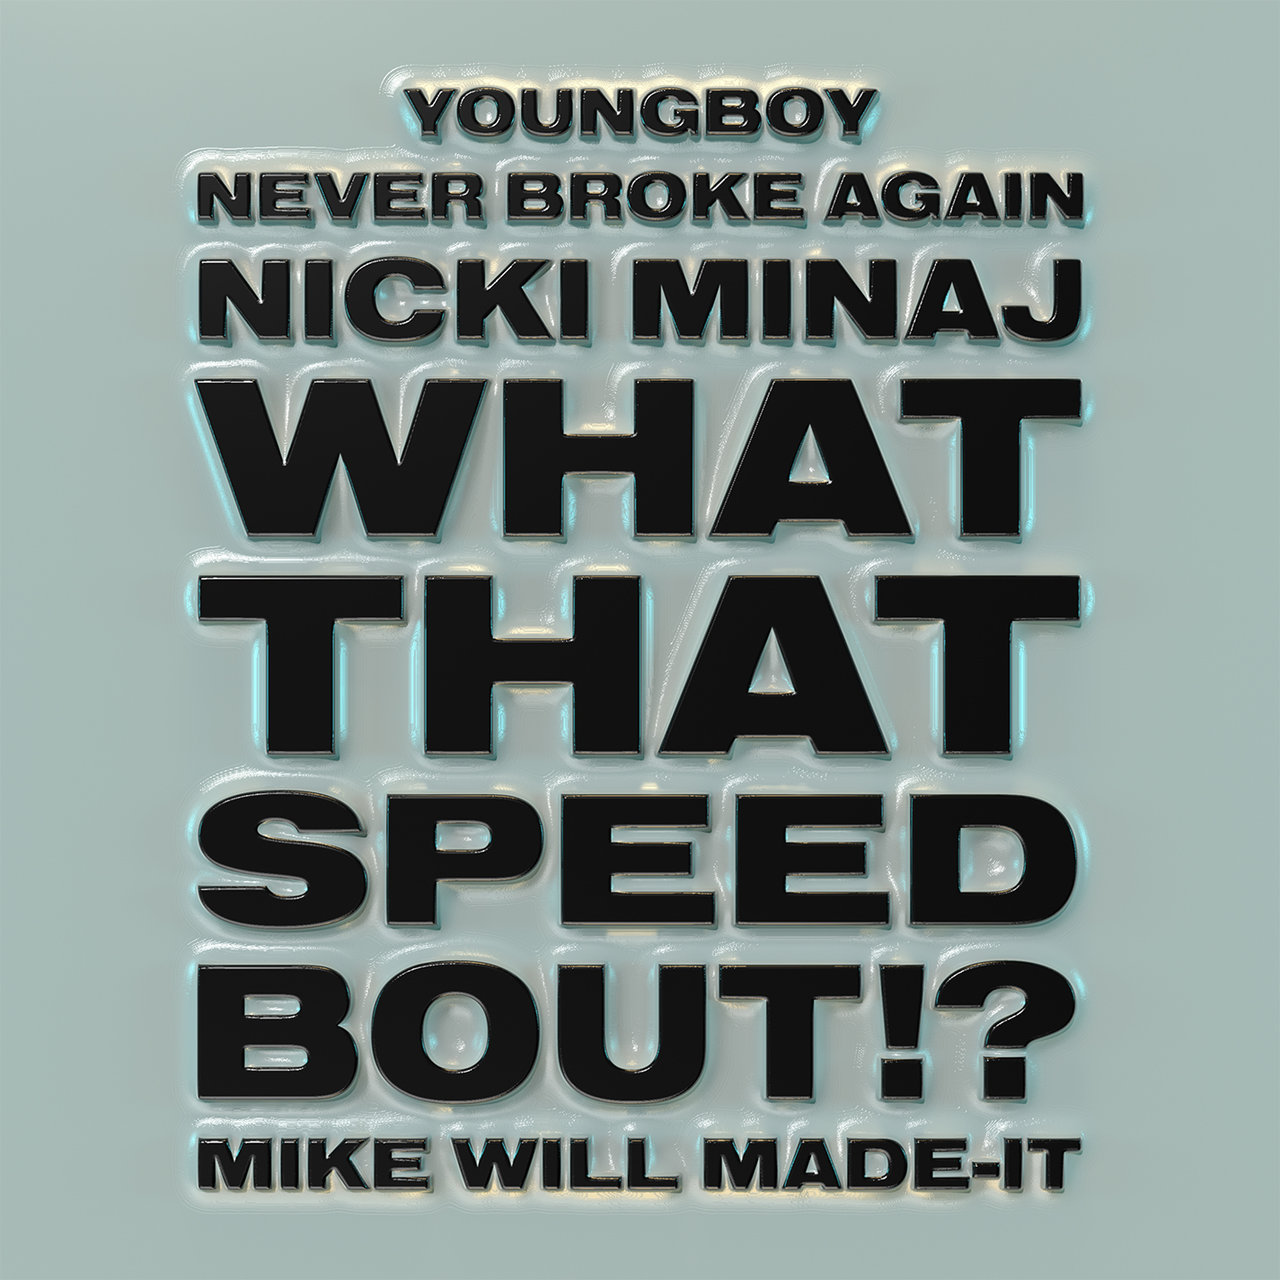 Mike WiLL Made-It & Nicki Minaj & YoungBoy Never Broke Again - What That Speed Bout.mp3